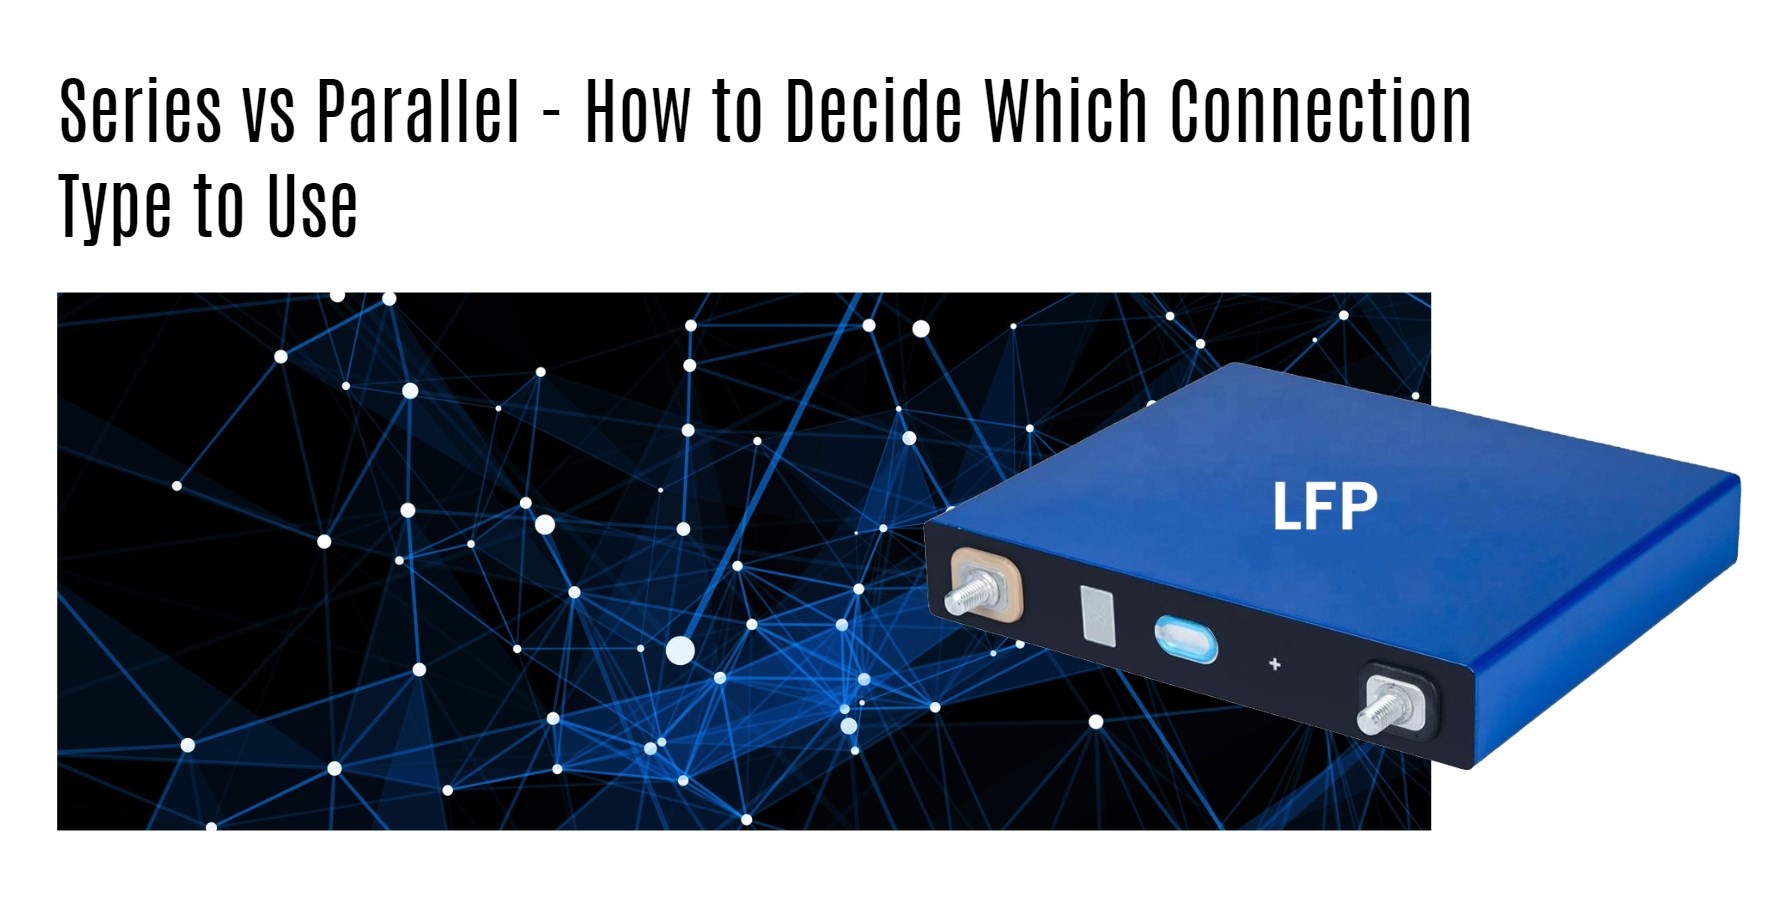 How to Decide Which Connection Type to Use